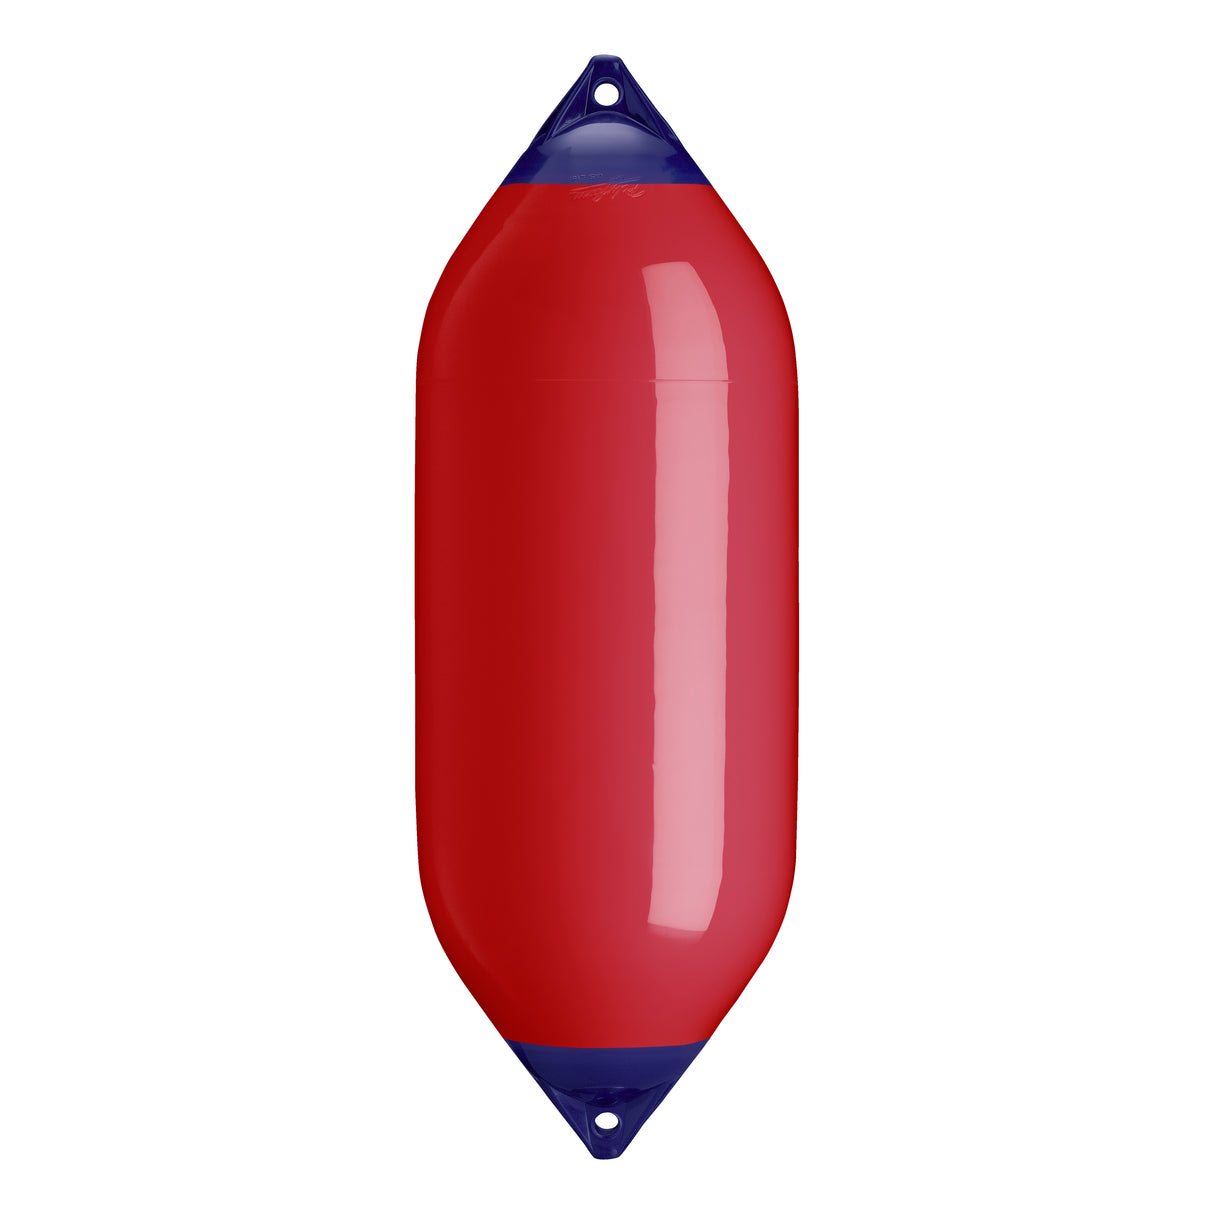 Classic Red boat fender with Navy-Top, Polyform F-10 